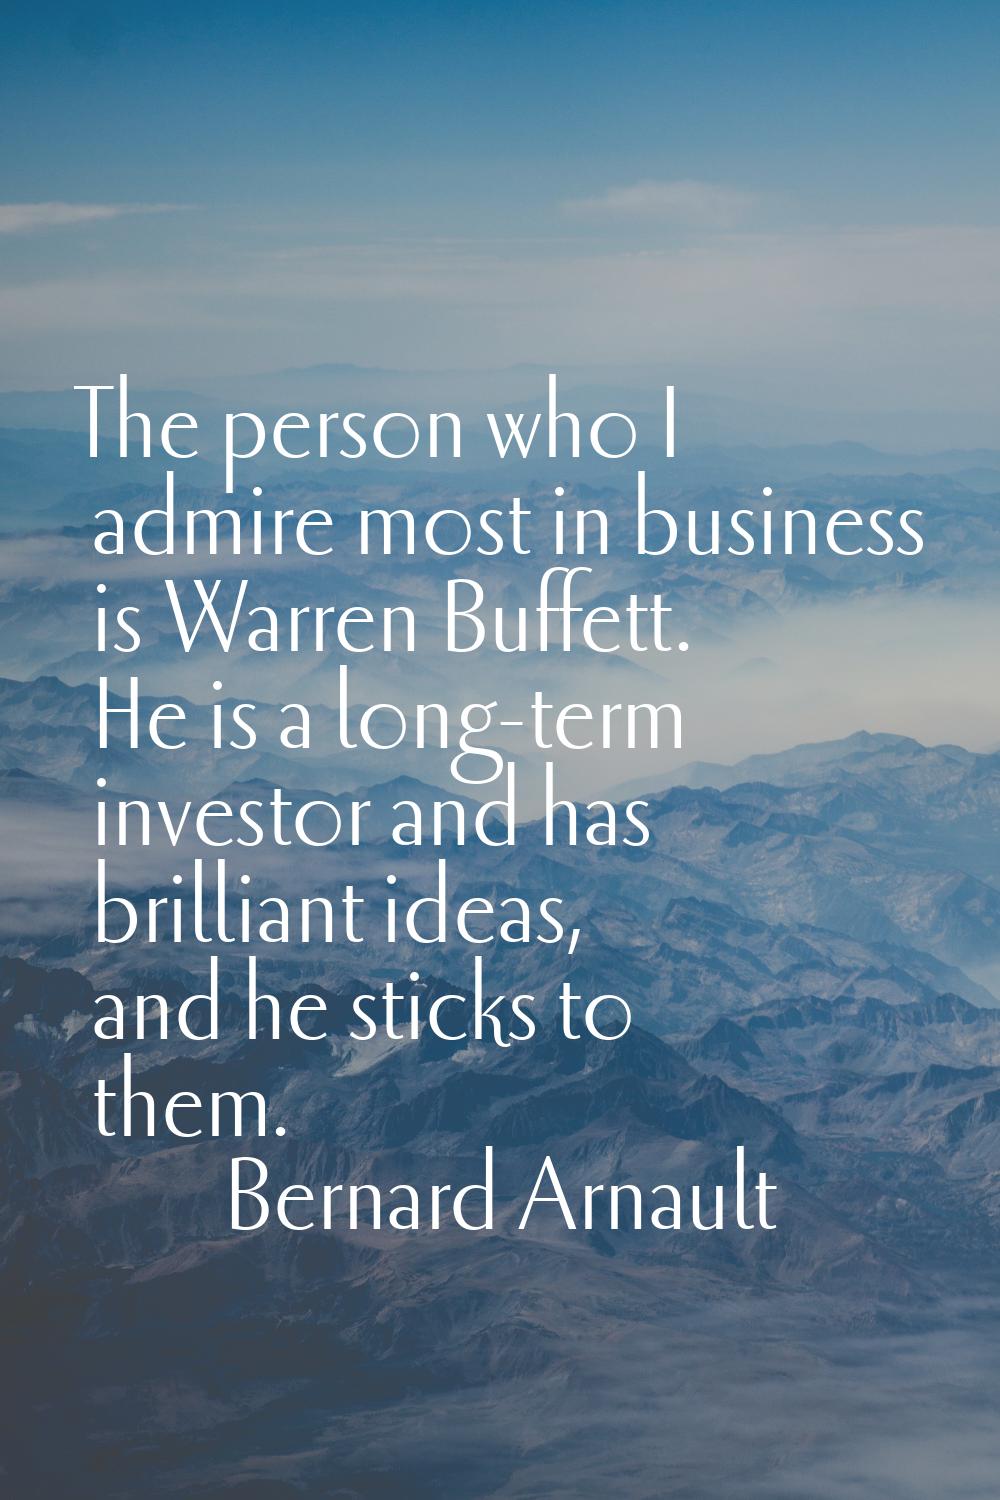 The person who I admire most in business is Warren Buffett. He is a long-term investor and has bril